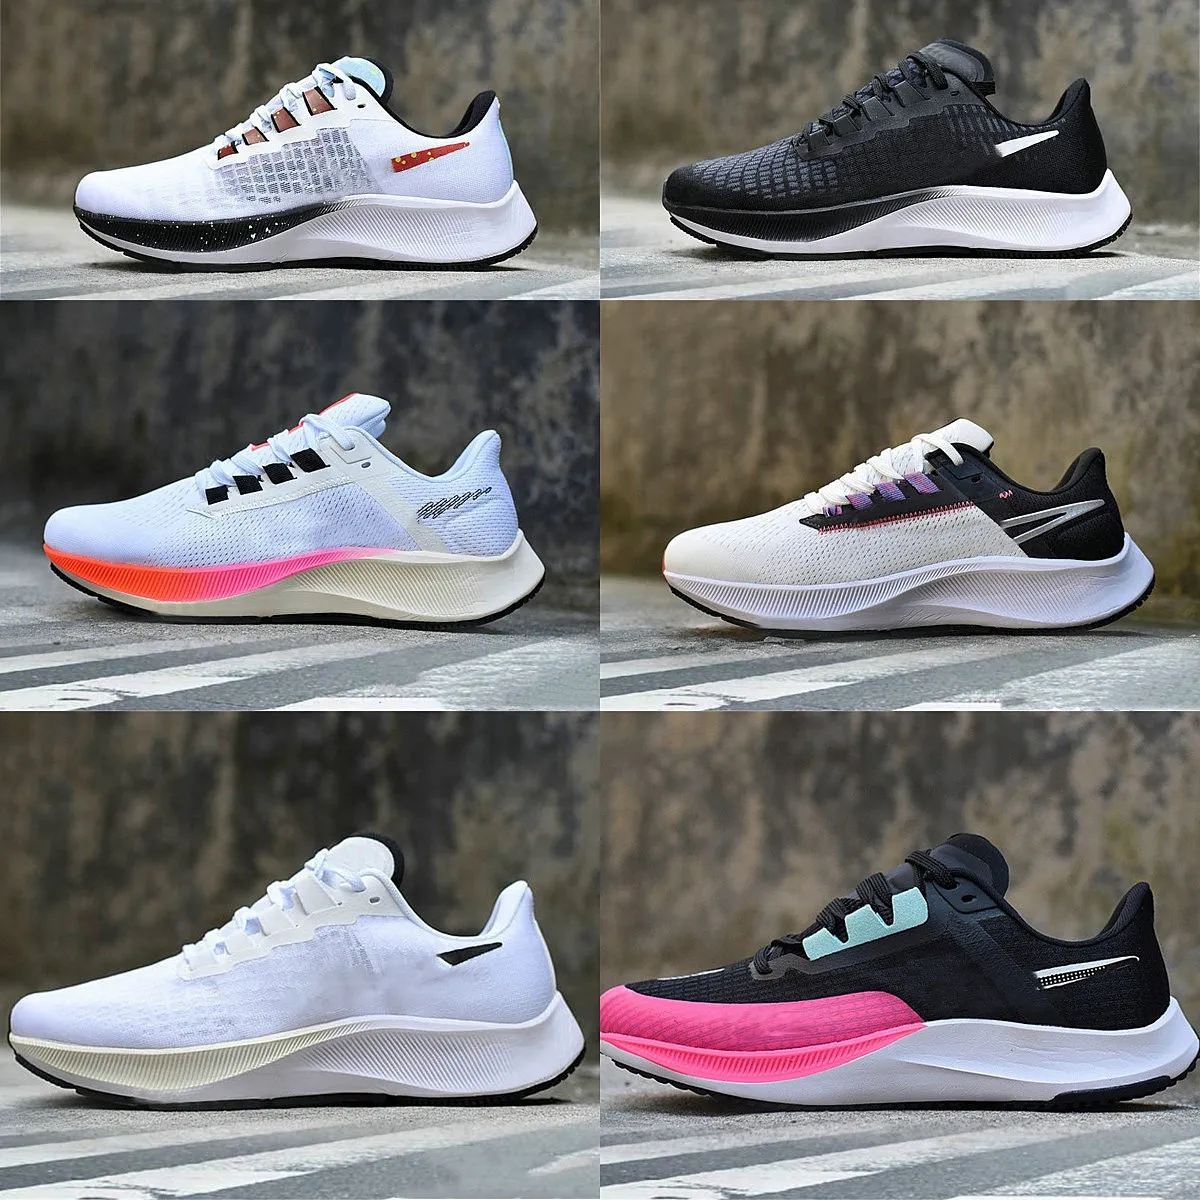 Designers Pegasus be True 37 39 35 Turbo Casual Sports Shoes Zoom Flyease 38 Triplo White Midnight Navy Chloro Ribbon Multi Anthracite Sneakers Y58